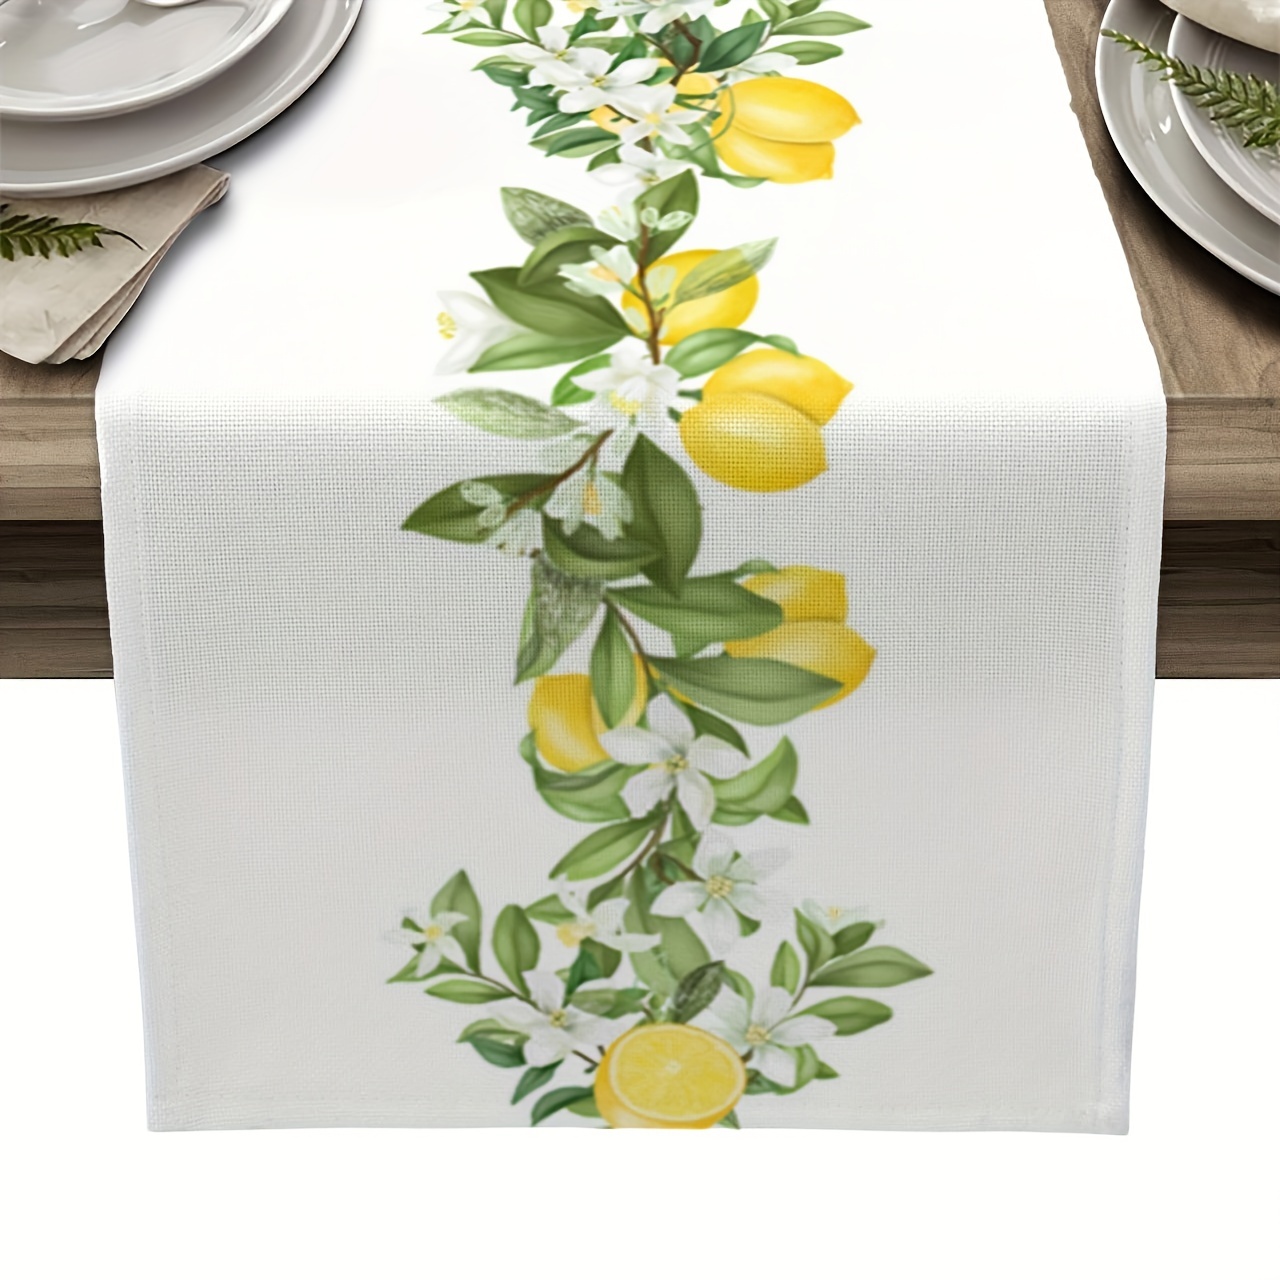 

Rustic Lemon & Leaves Table Runner - Yellow Floral Farmhouse Decor For Dining, Perfect For Family Gatherings, Holidays & Coffee Tables, 13 X 72 Inch